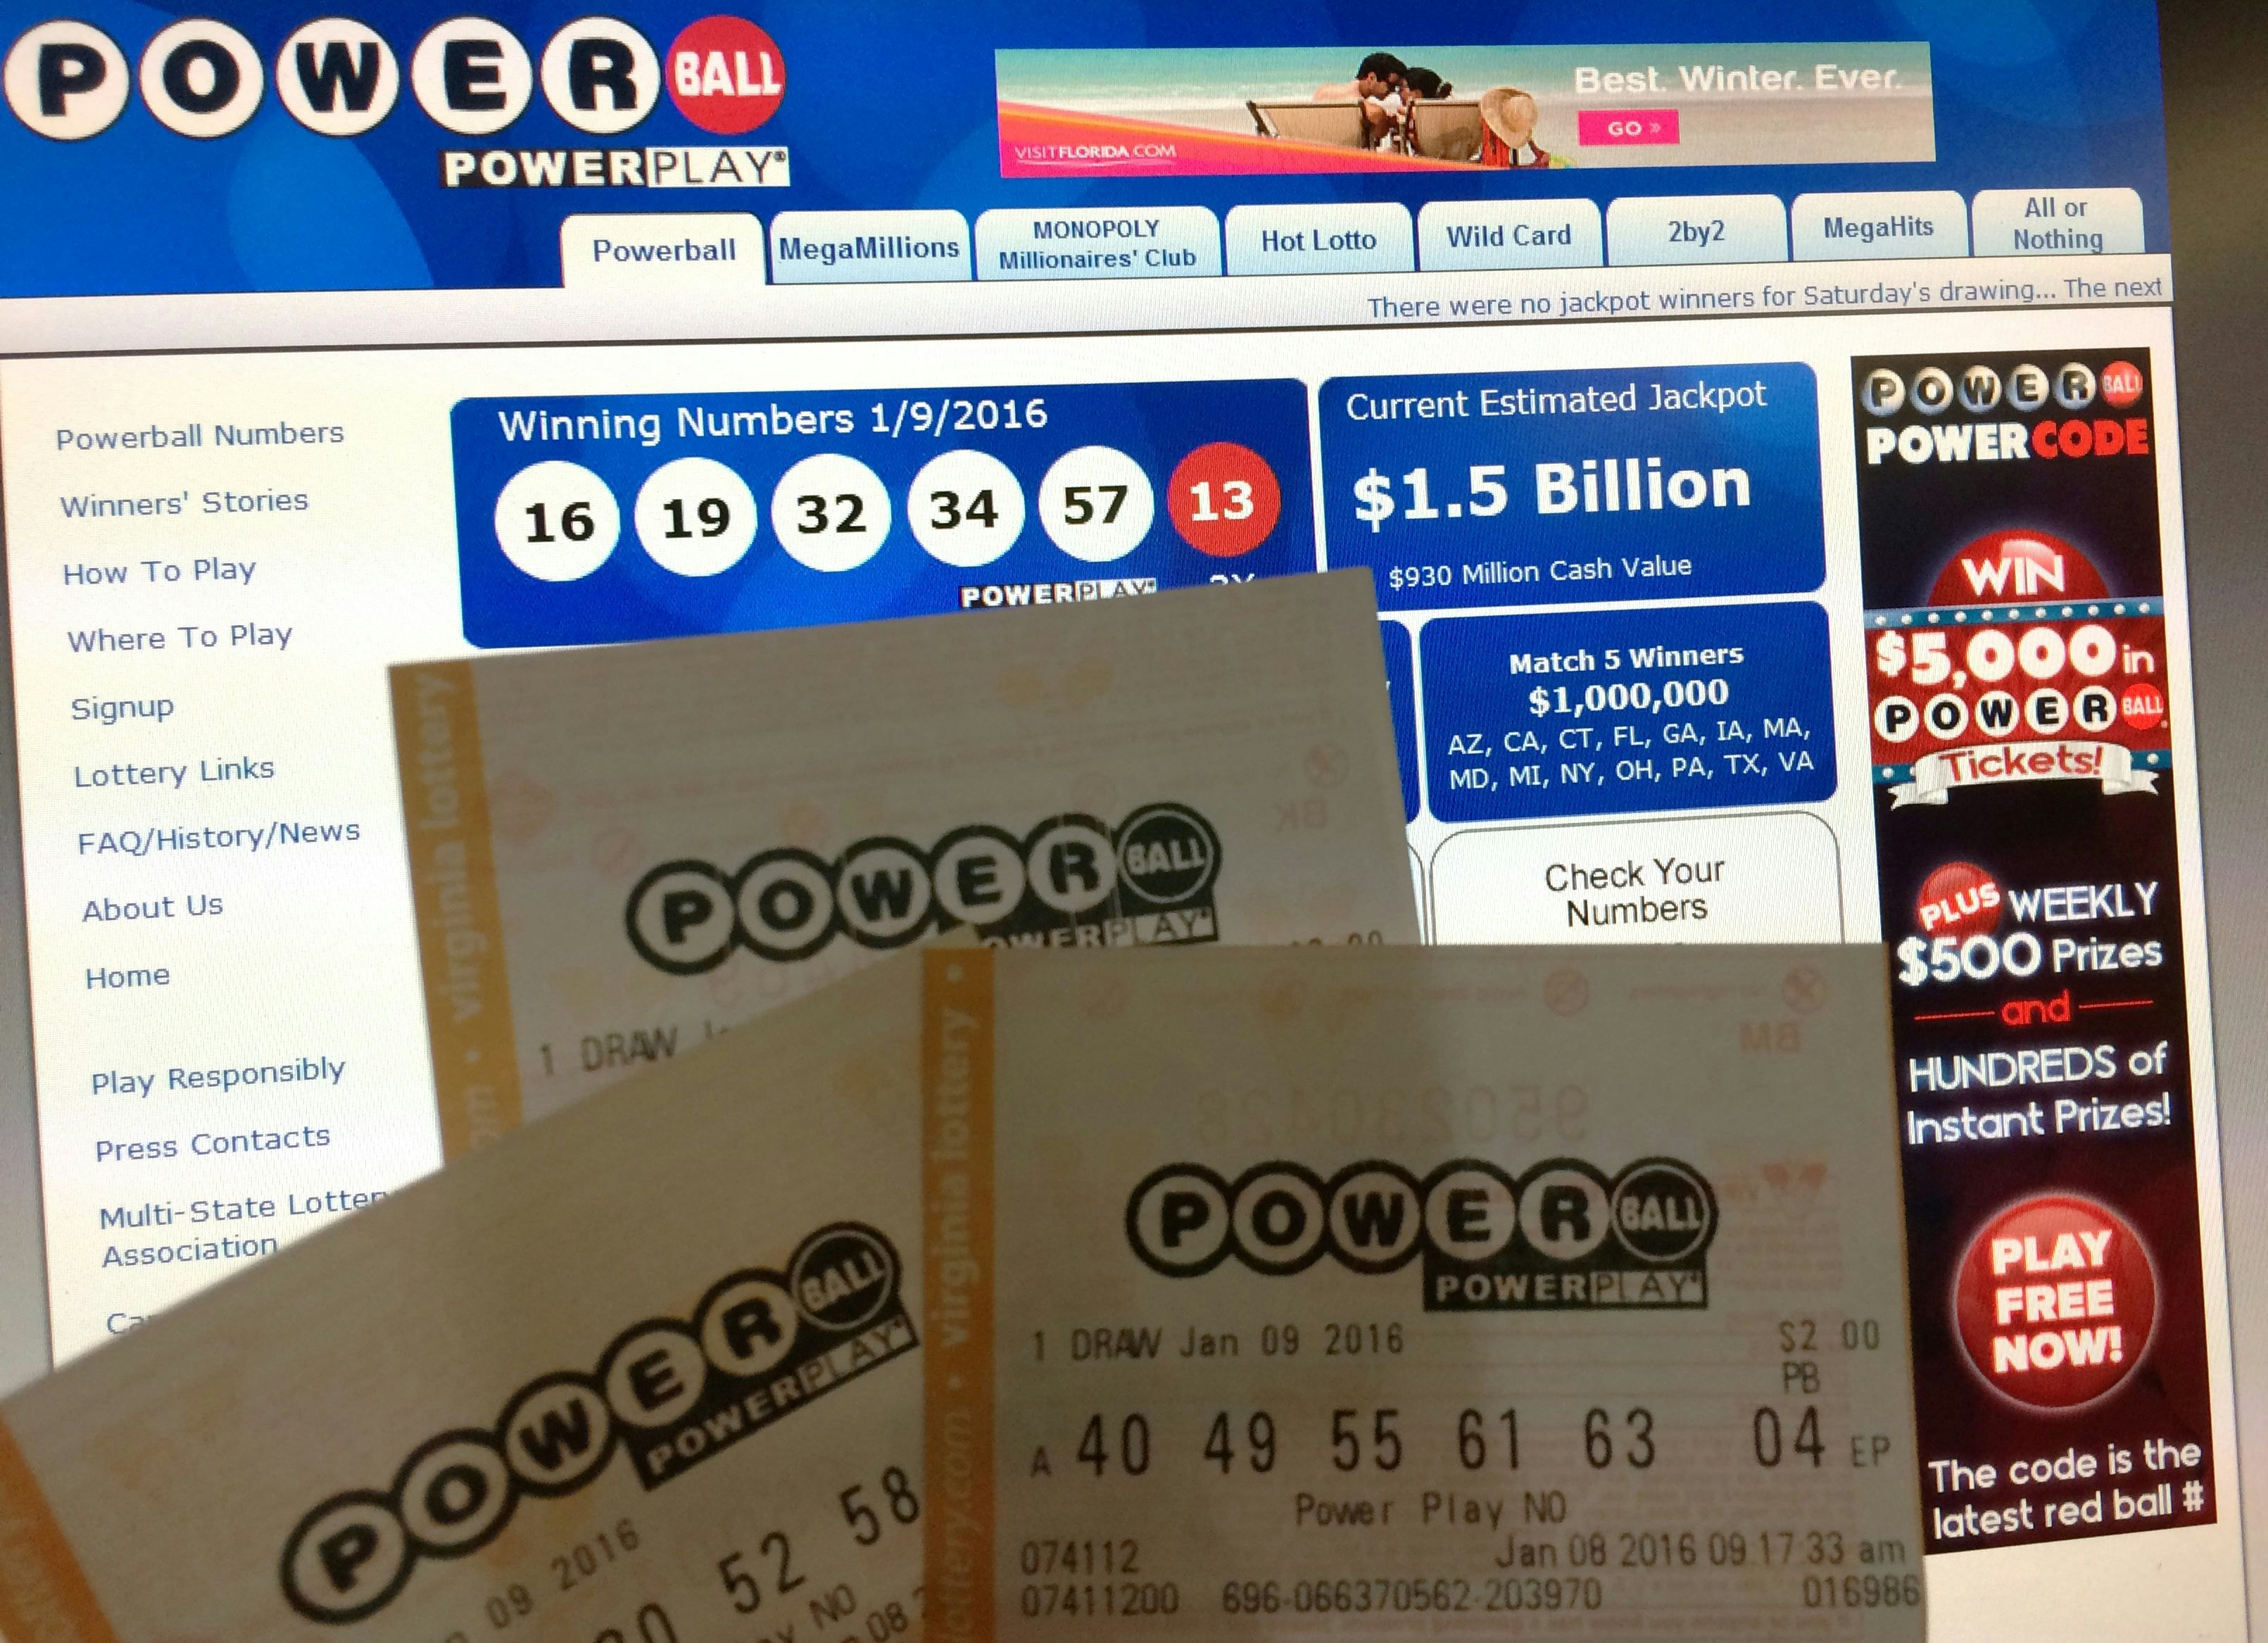 What do you win if you have the Powerball number?